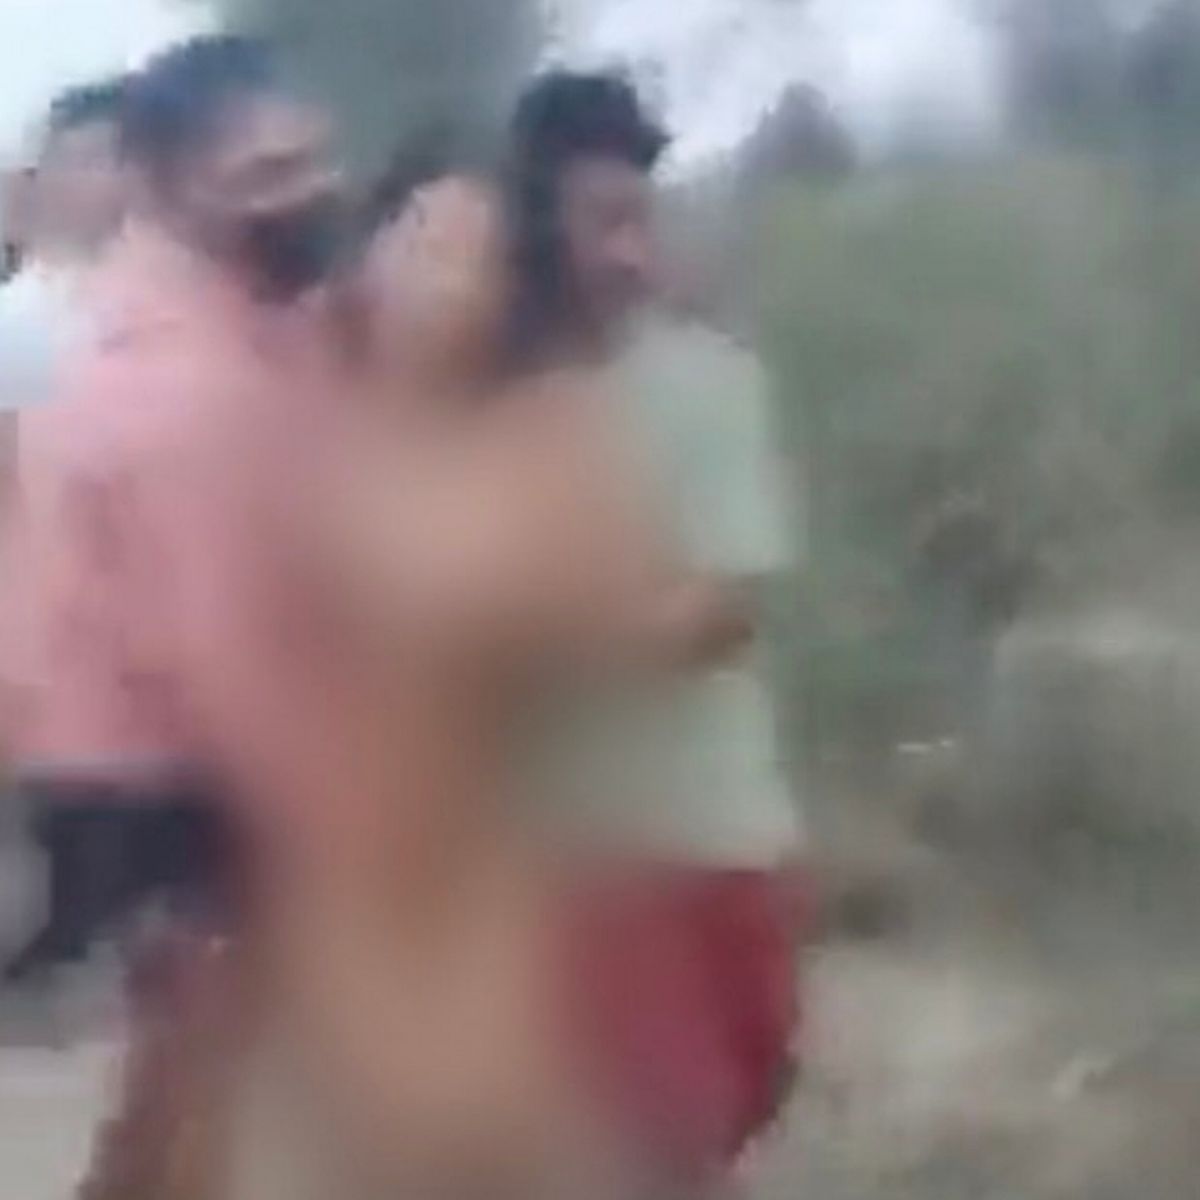 0_PAY-Outrage-across-India-over-horror-footage-of-women-being-paraded-naked-through-crowd-of-g...jpg